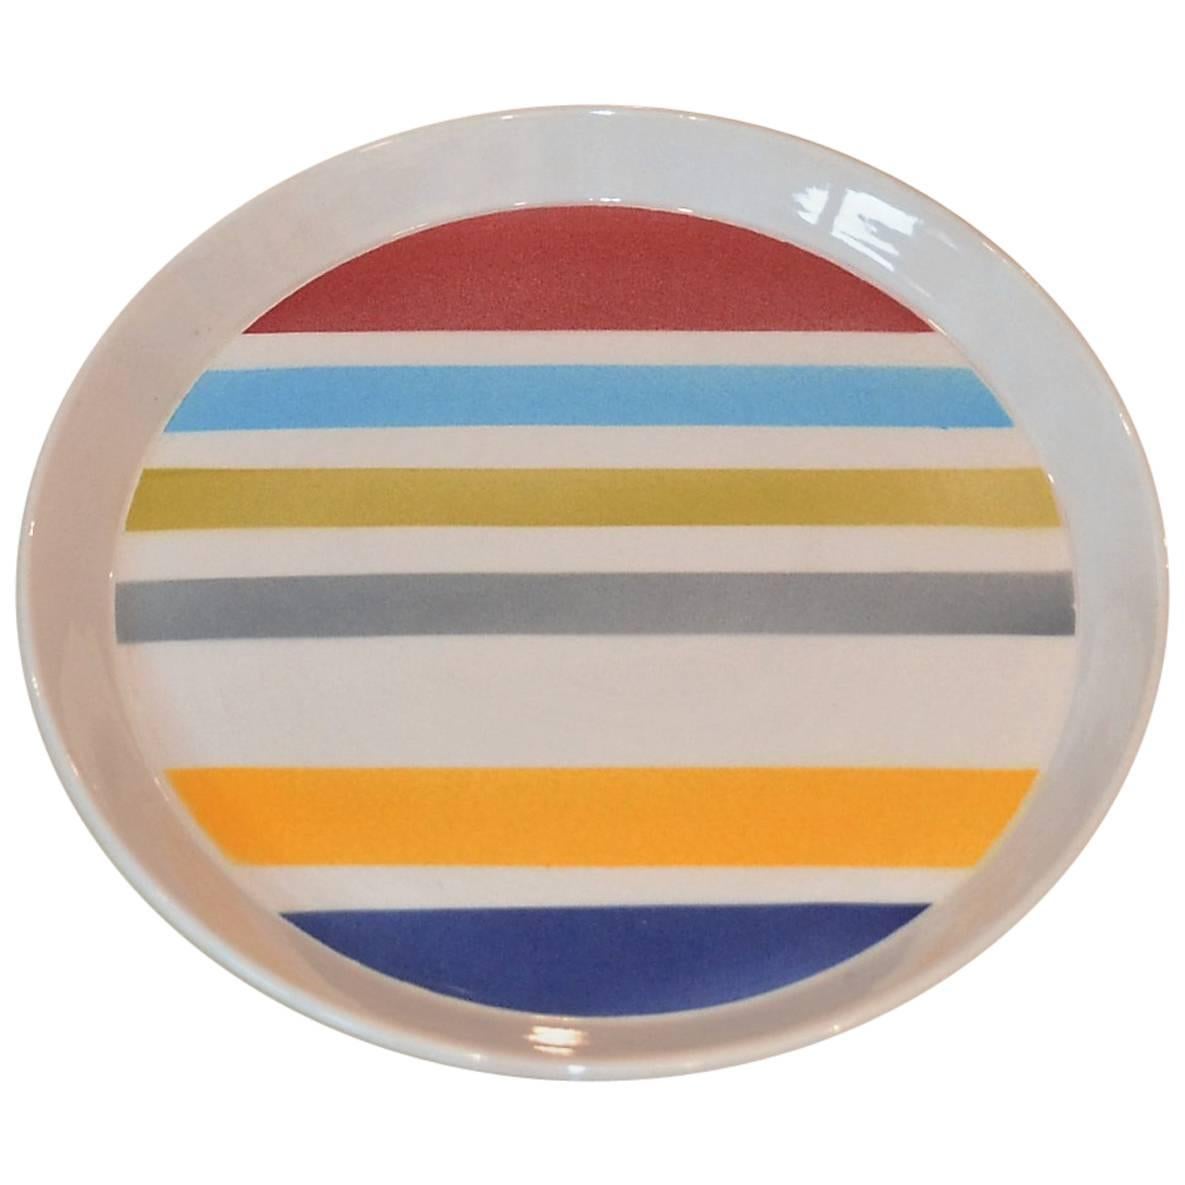 Modernist Colorful Plate Designed by Gio Ponti, Italy, 1960s